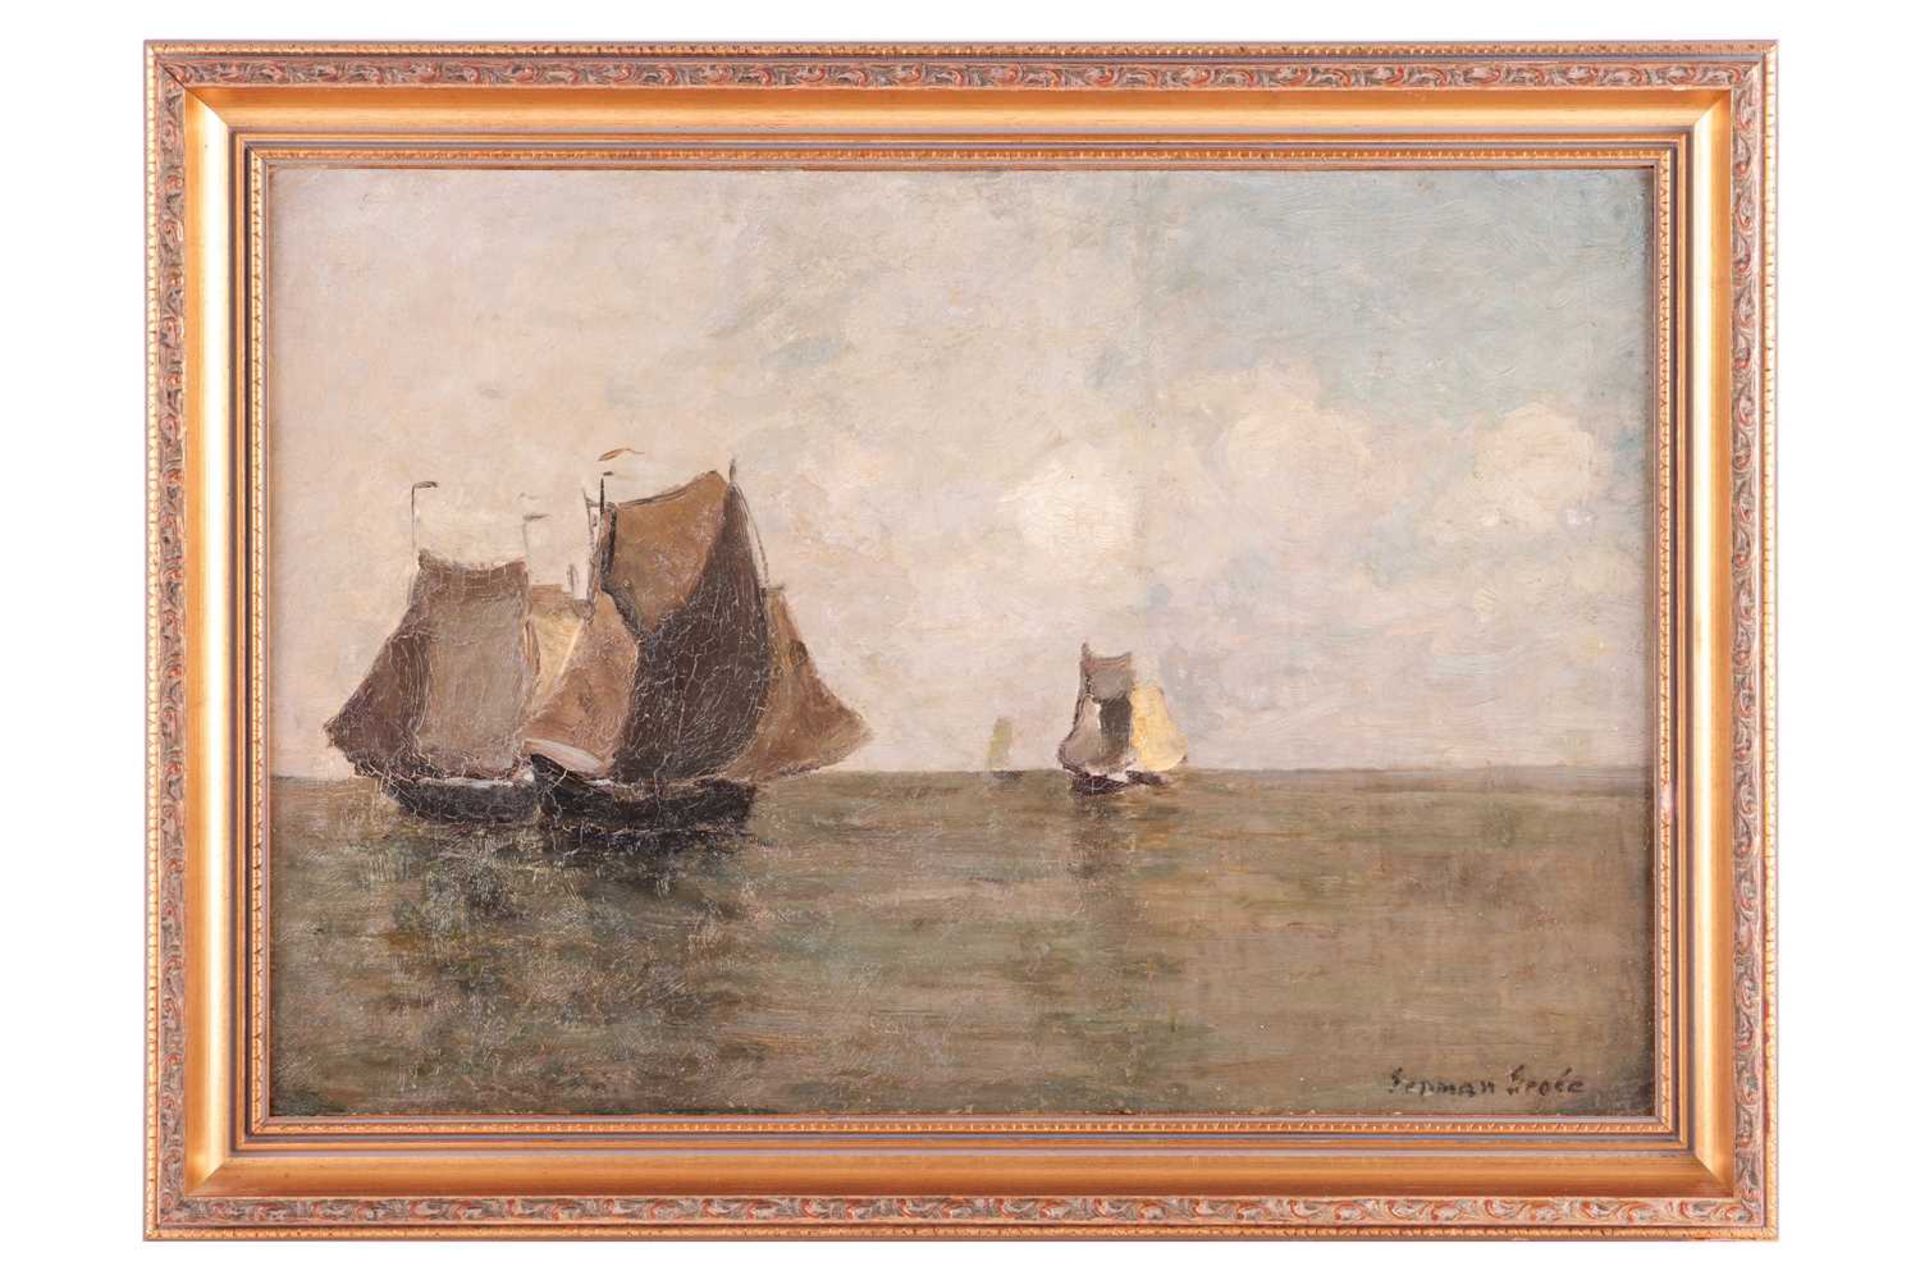 German Grobe (1857-1938), seascape with boats, oil on panel, signed to lower right corner, 32 cm x 4